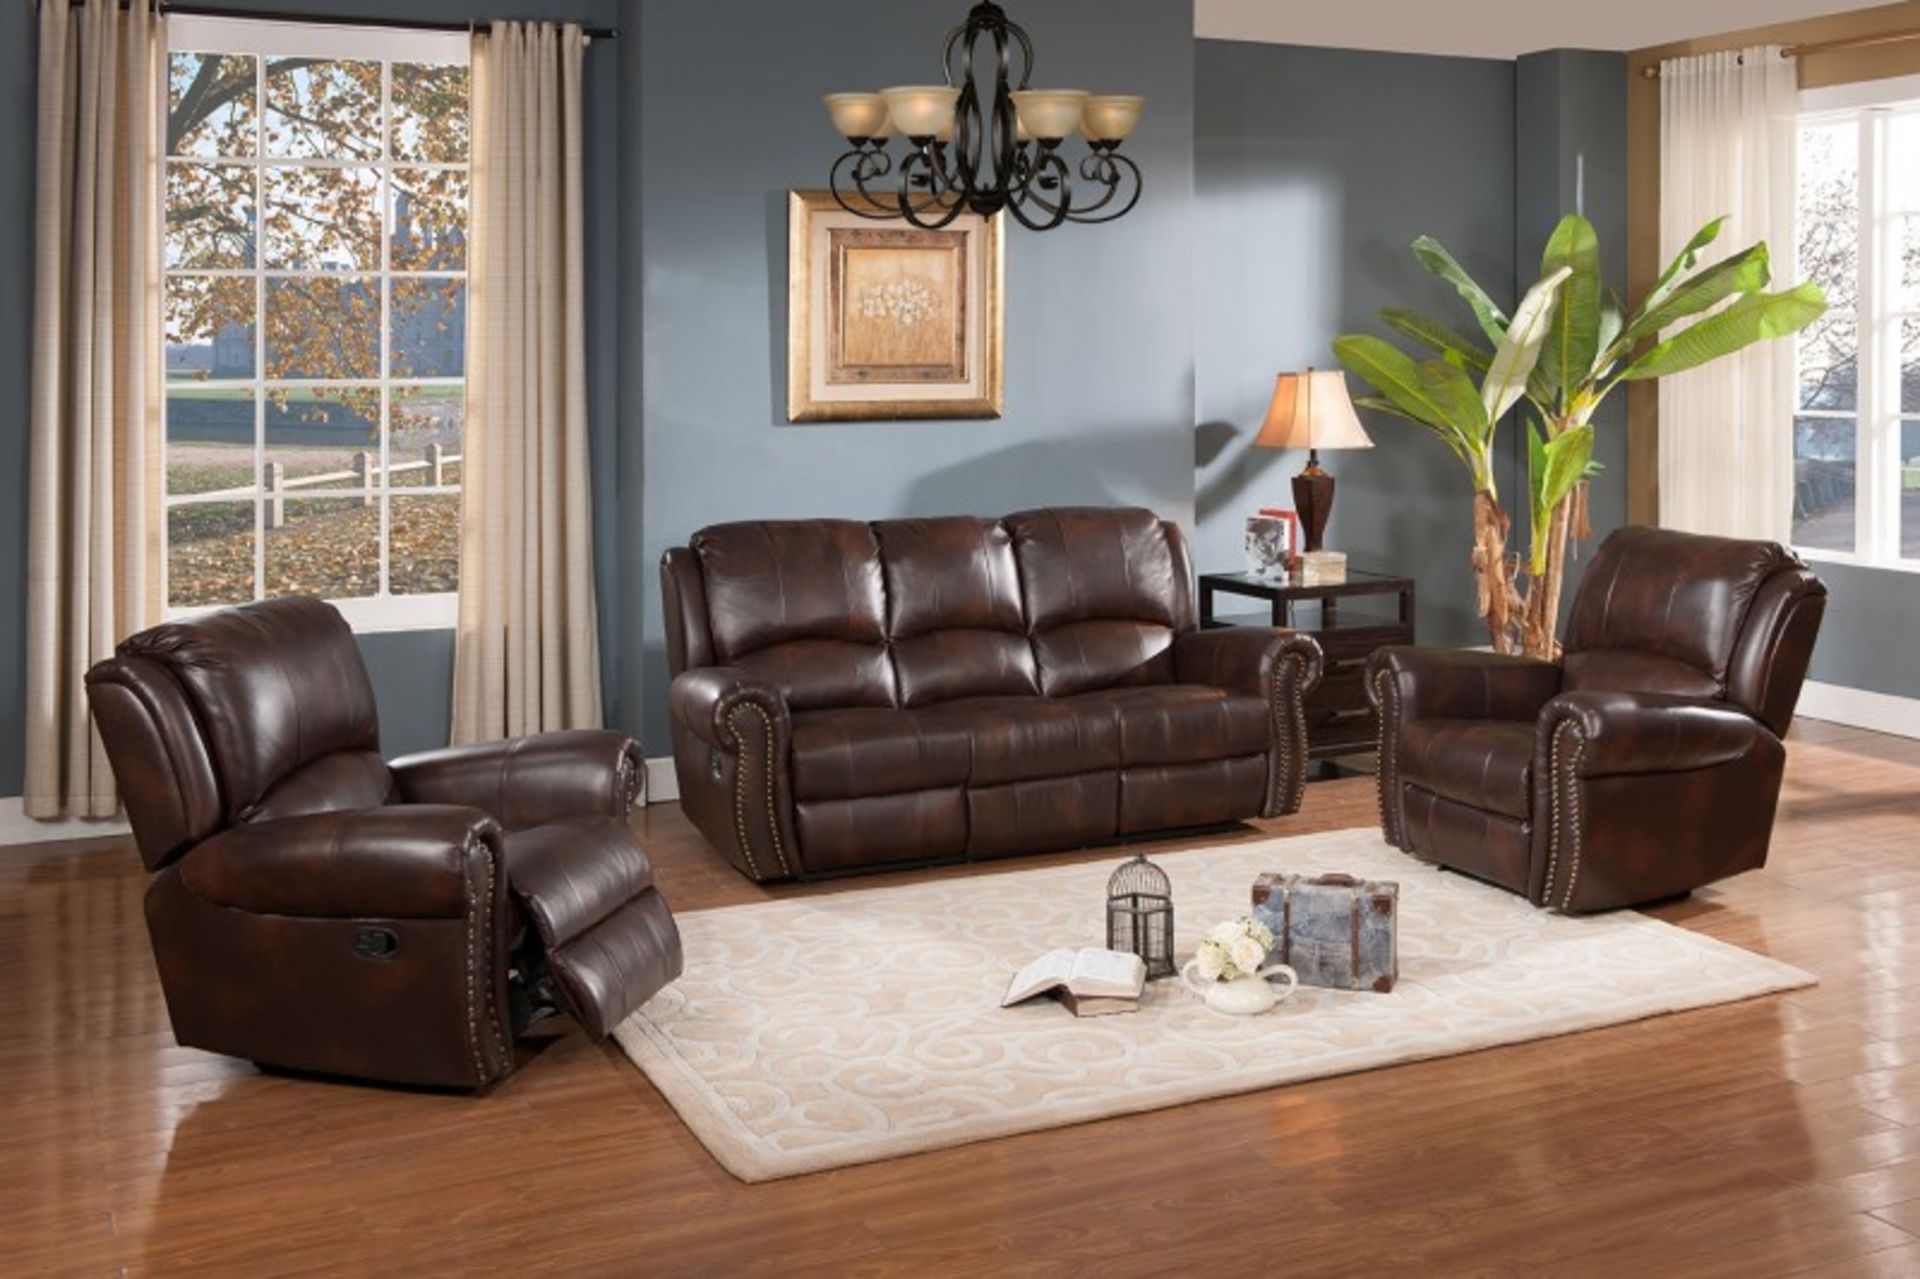 Brand new direct from the manufacturers sanfrancisco deluxe 3 seater and 2 arm chairs in shiny brown